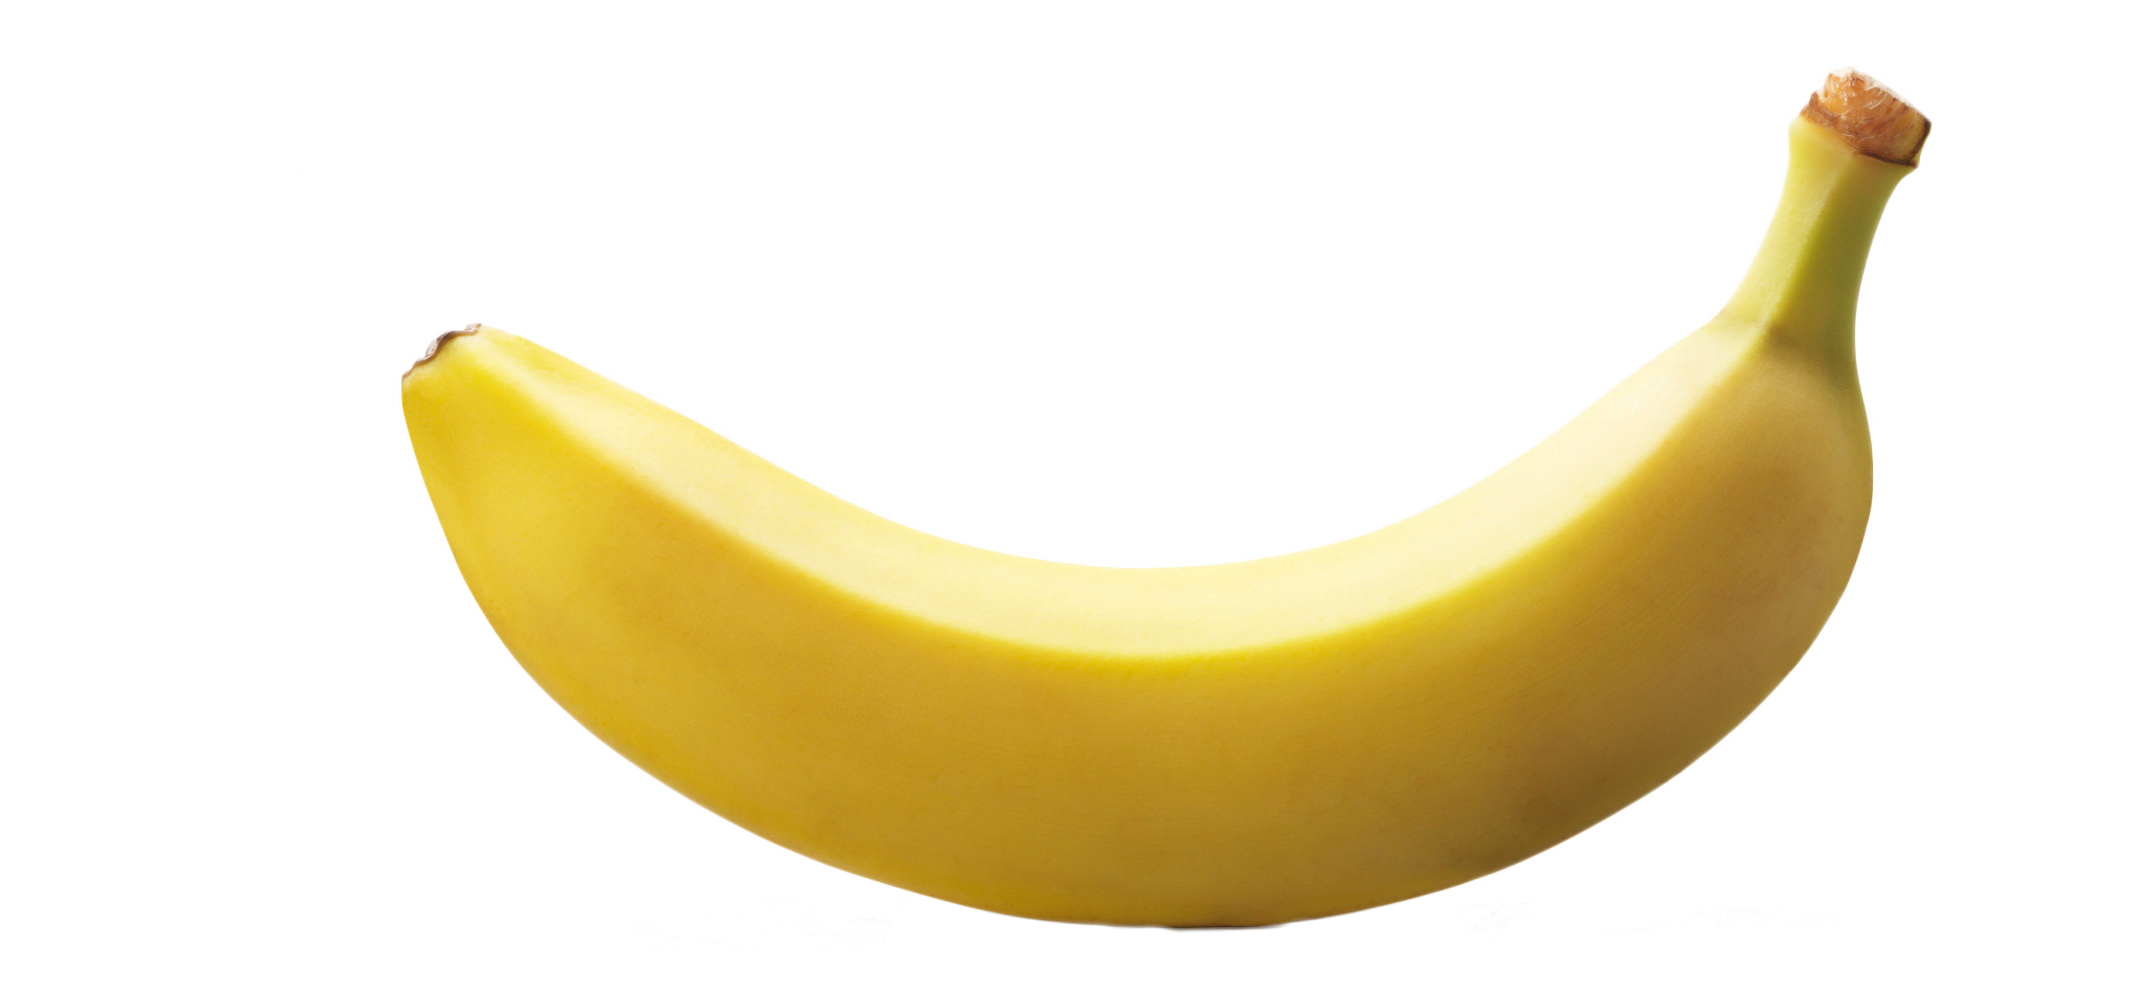 Banana Png Images Transparent Background Png Play